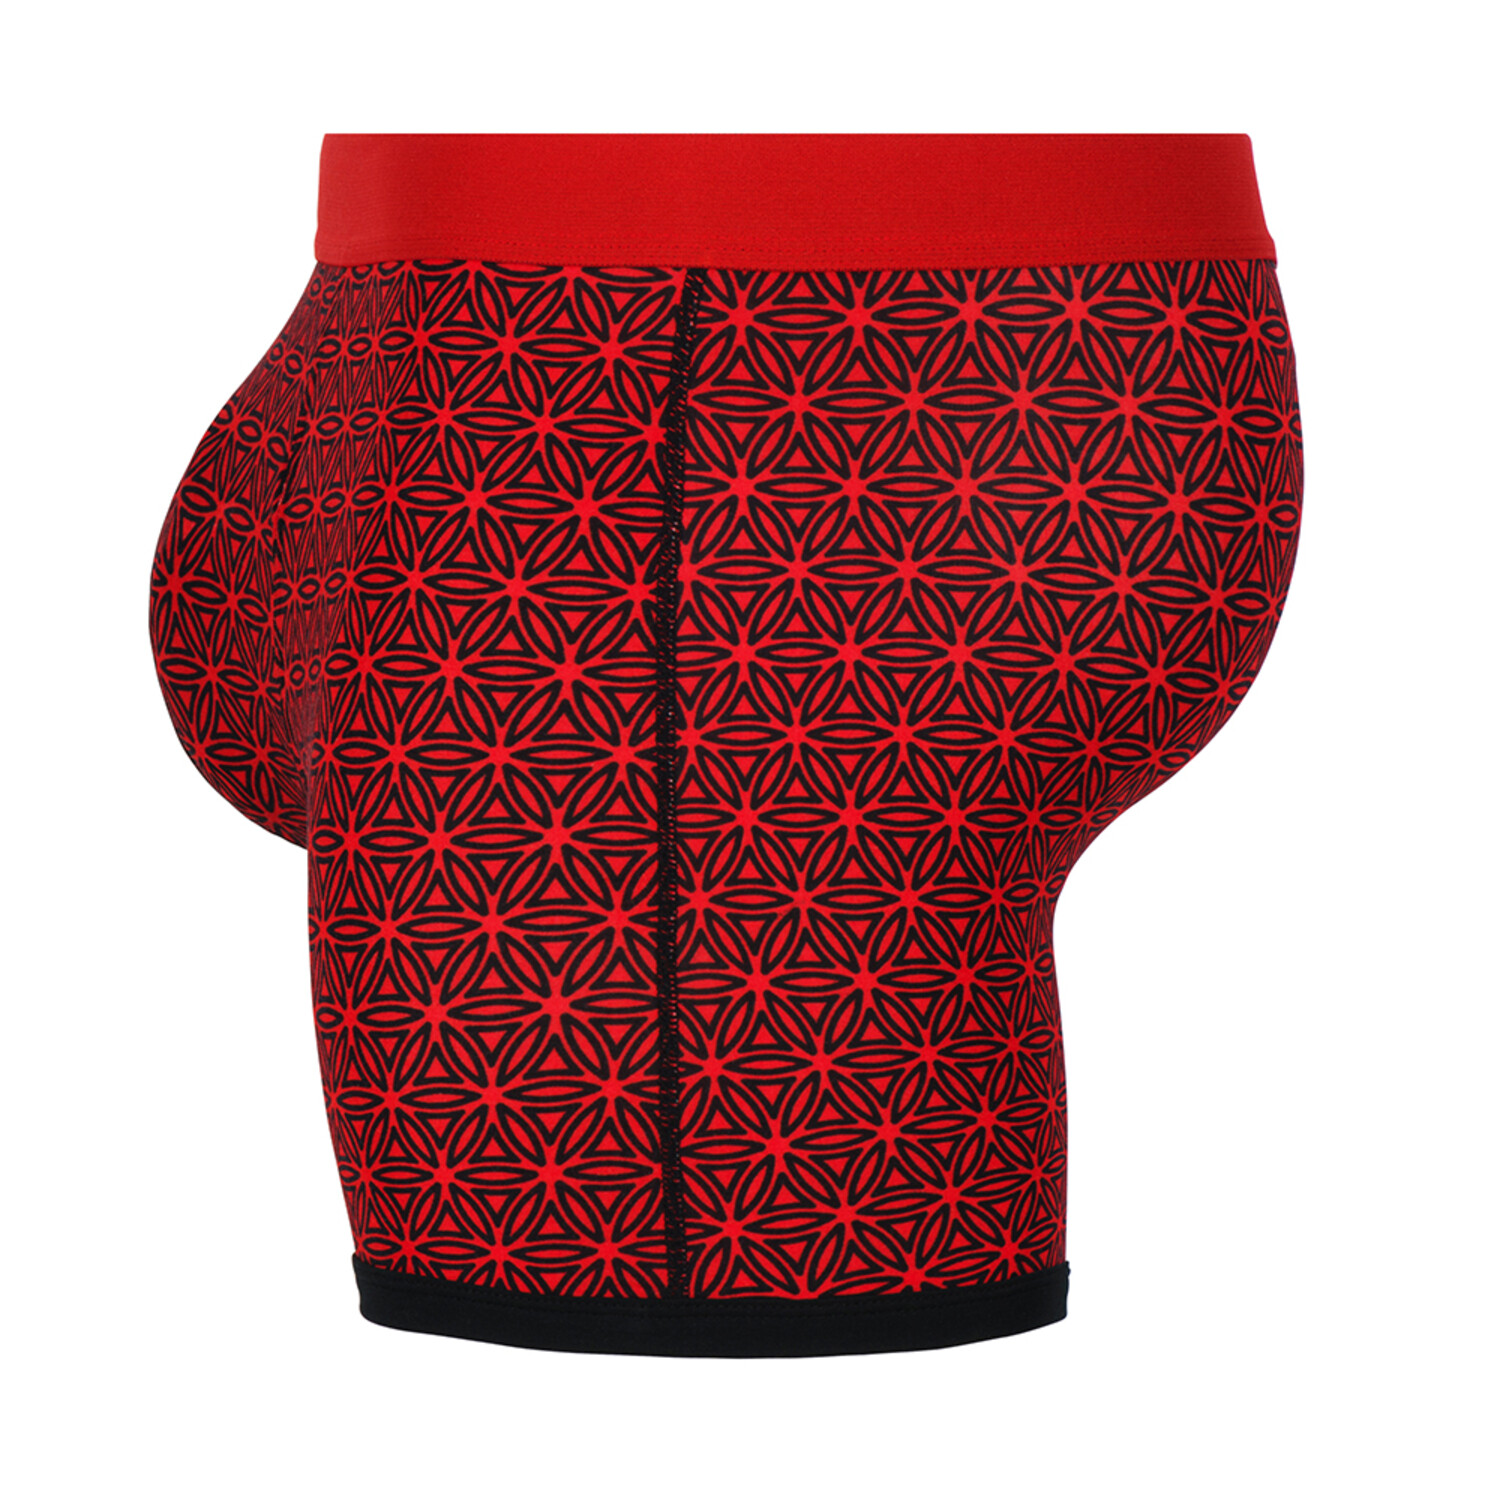 SHEATH 4.0 Men's Dual Pouch Boxer Brief // Red Flower of Life (X Large) - Sheath  Dual-pouch Boxer Briefs - Touch of Modern